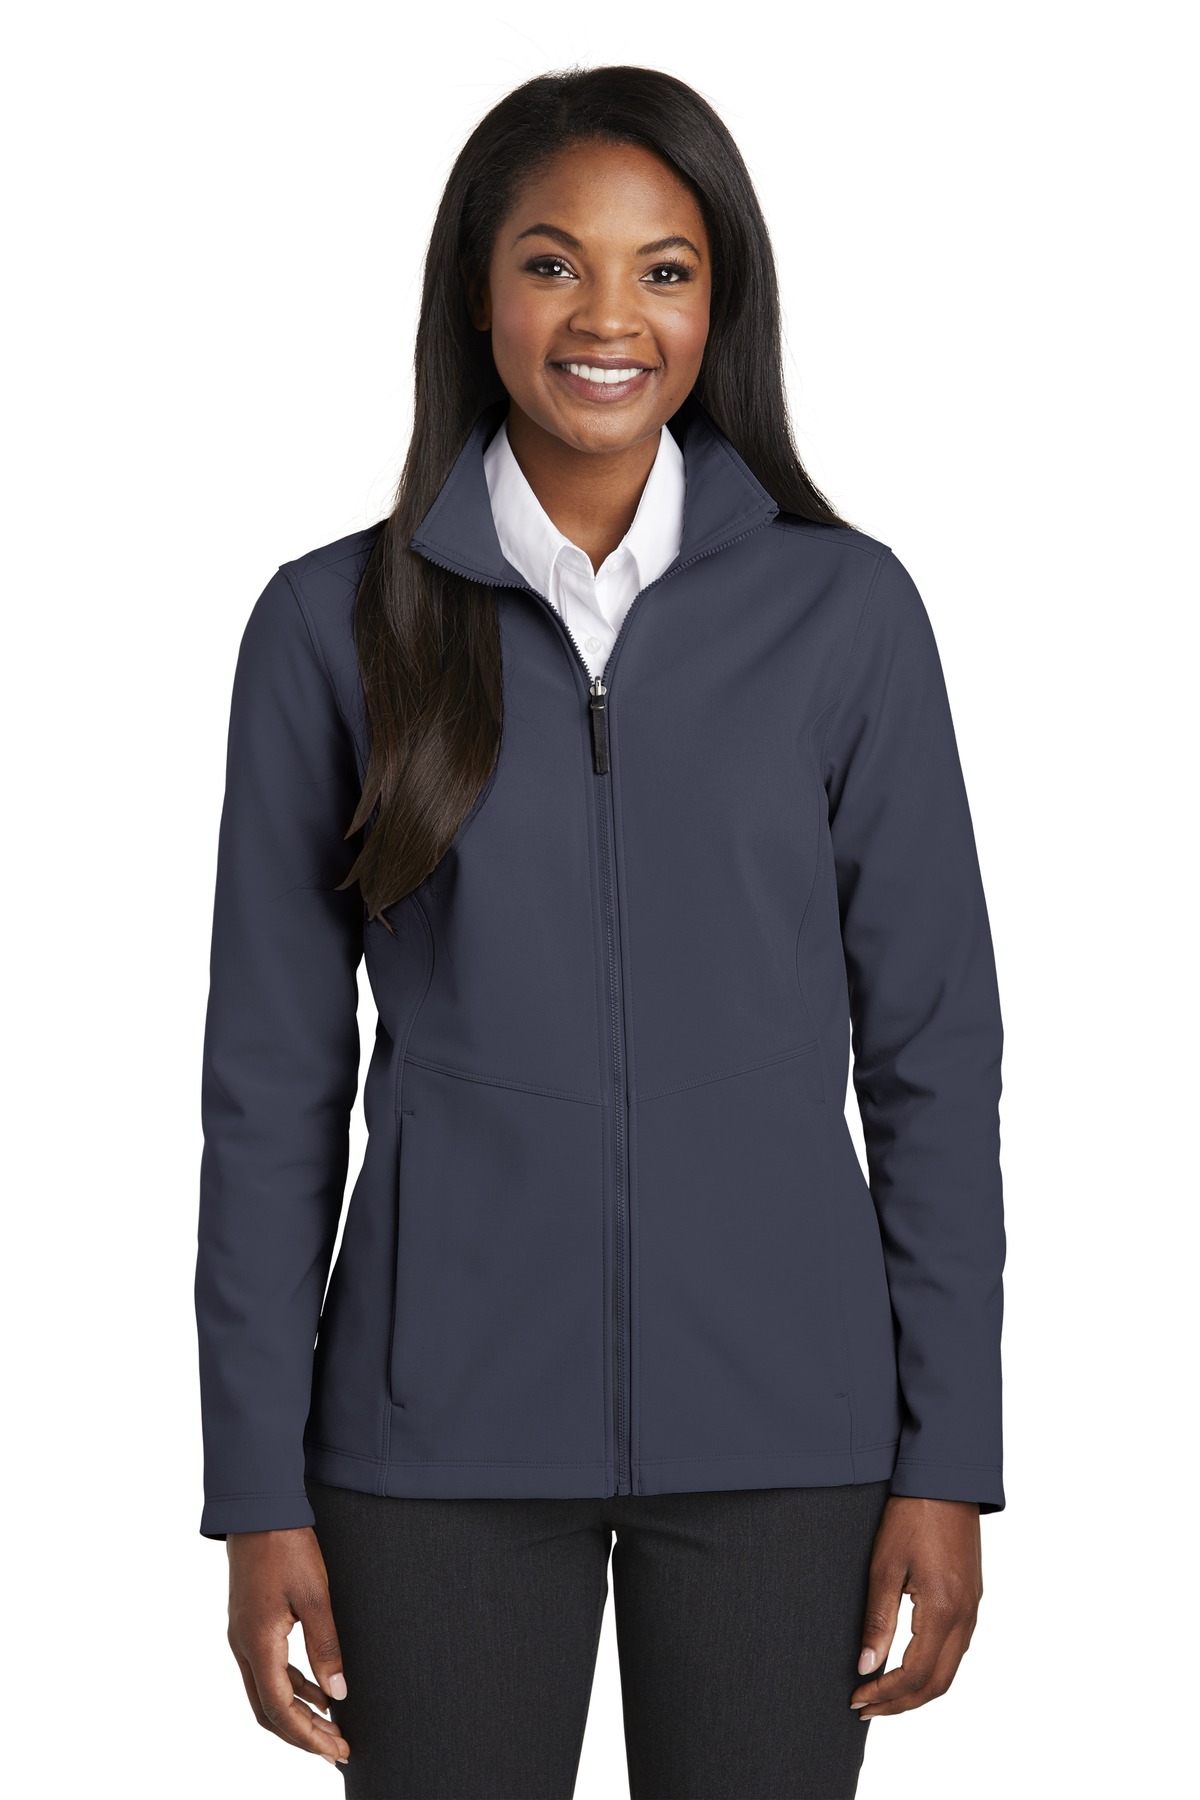 Port Authority  Ladies Collective Soft Shell Jacket. L901